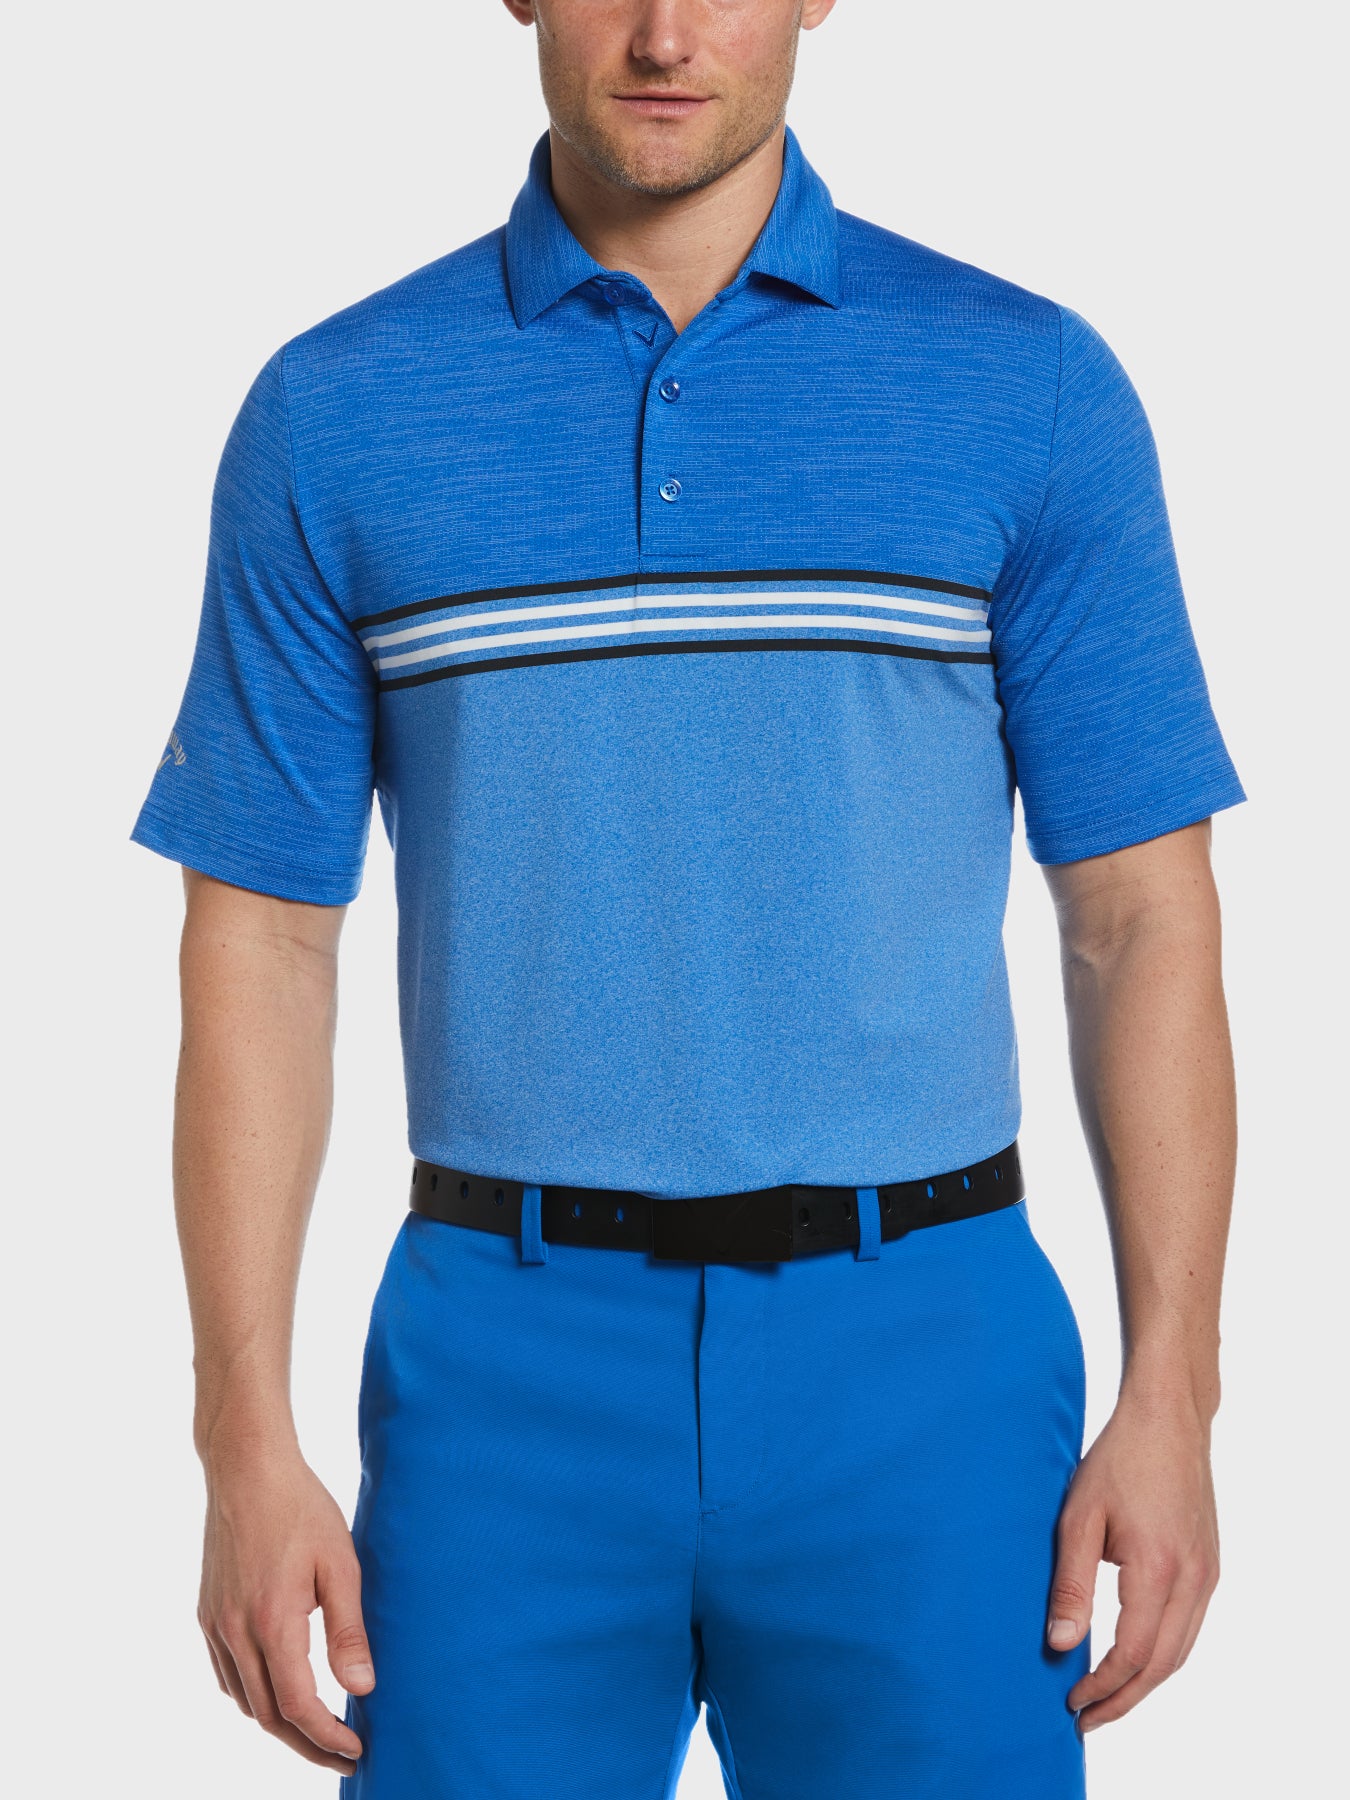 View Heathered Chest Stripe Polo In Magnetic Heather Magnetic Htr XXXL information